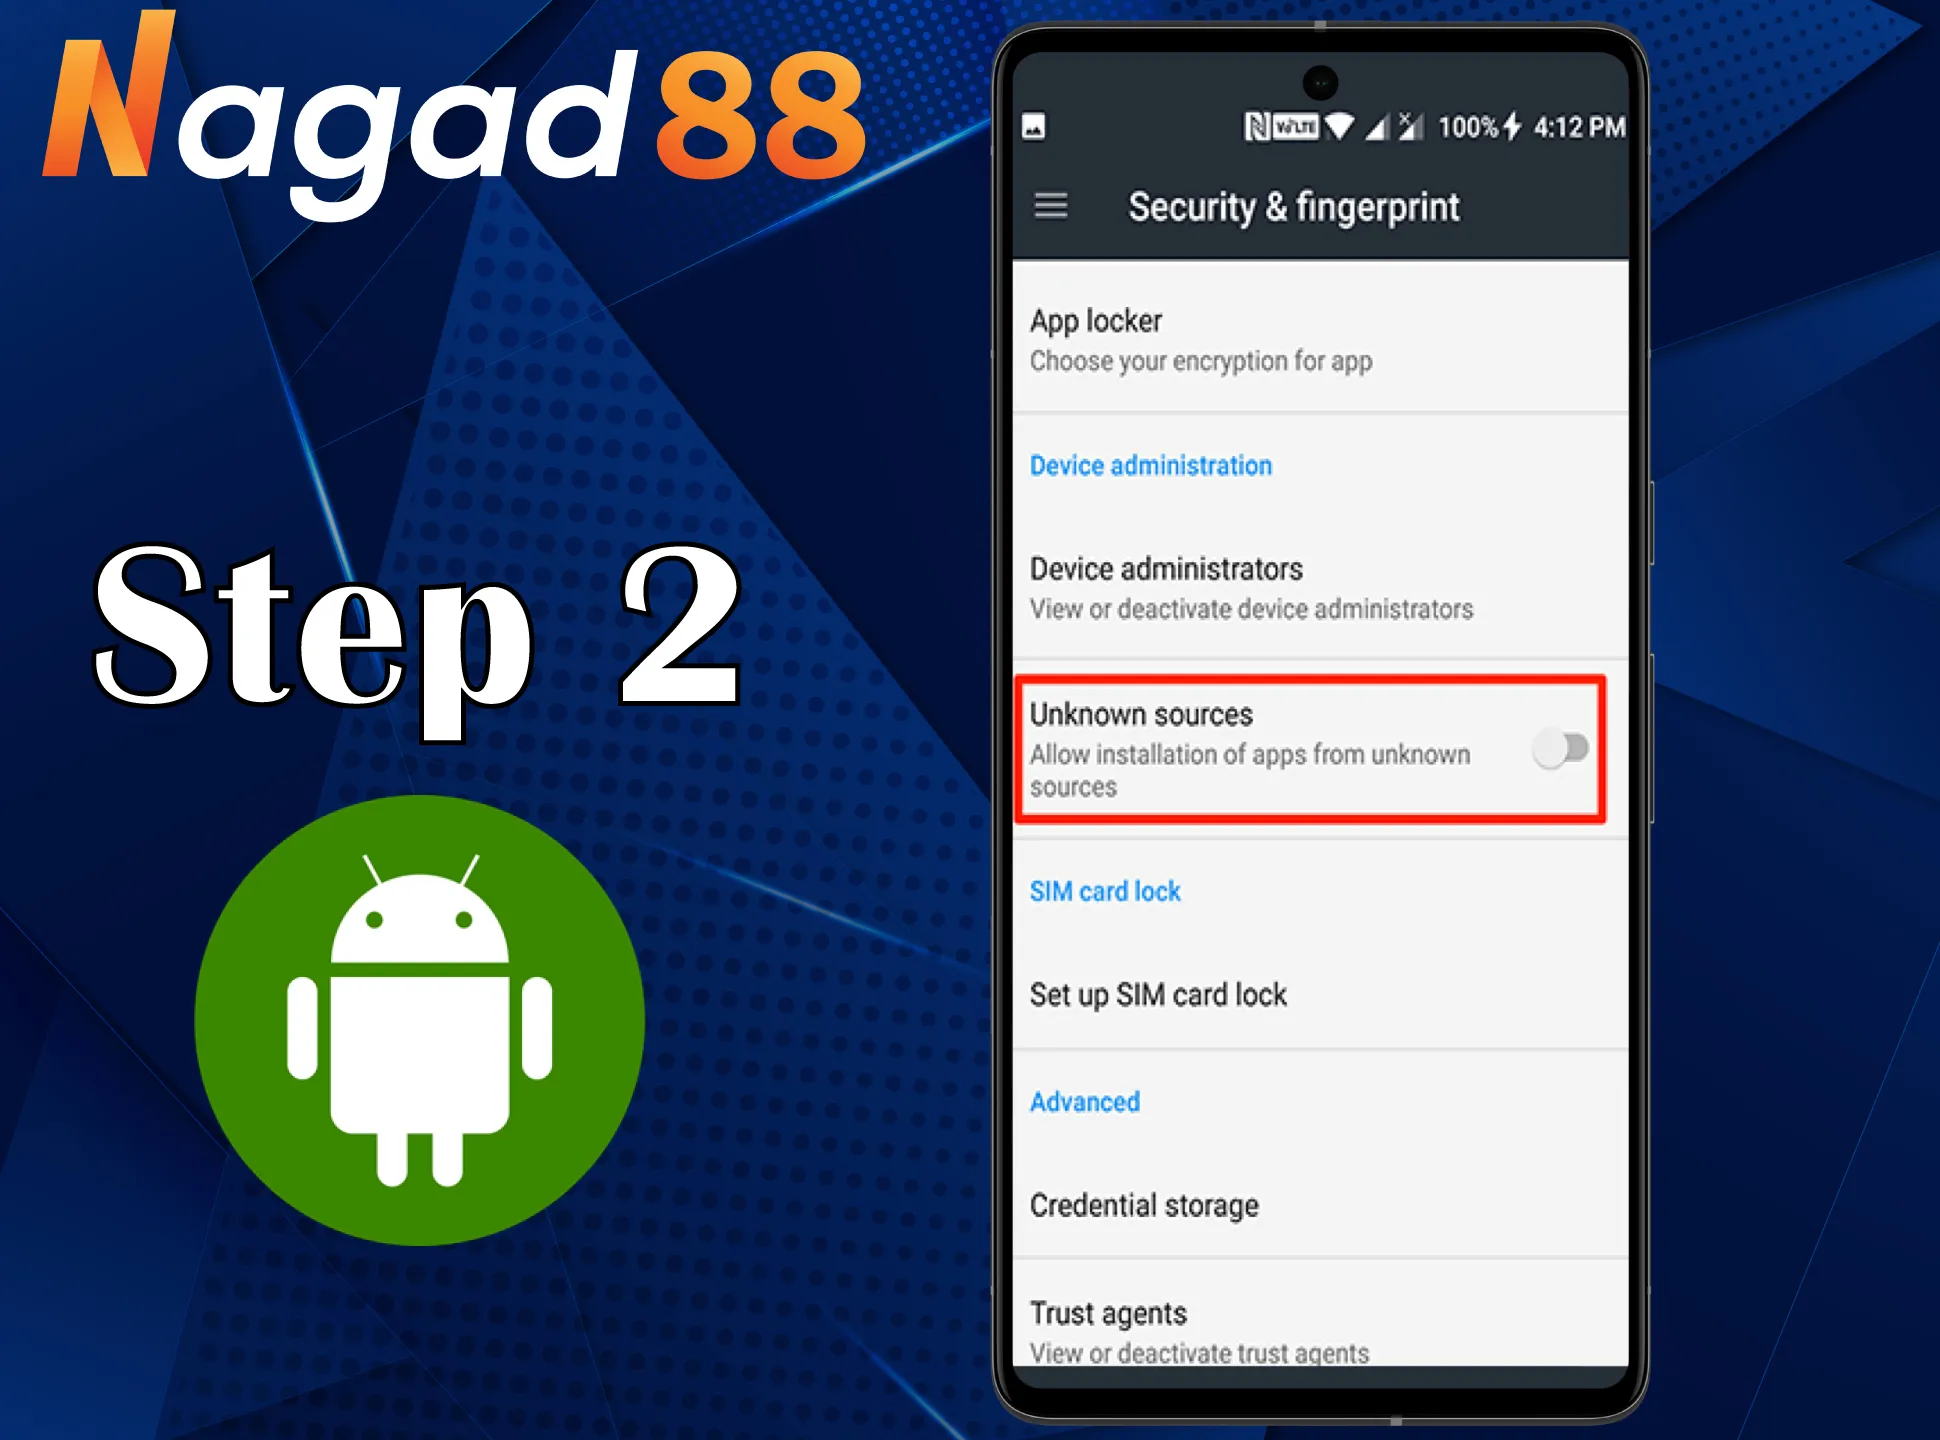 Allow installation from unknown sources to install the Nagad88 app.